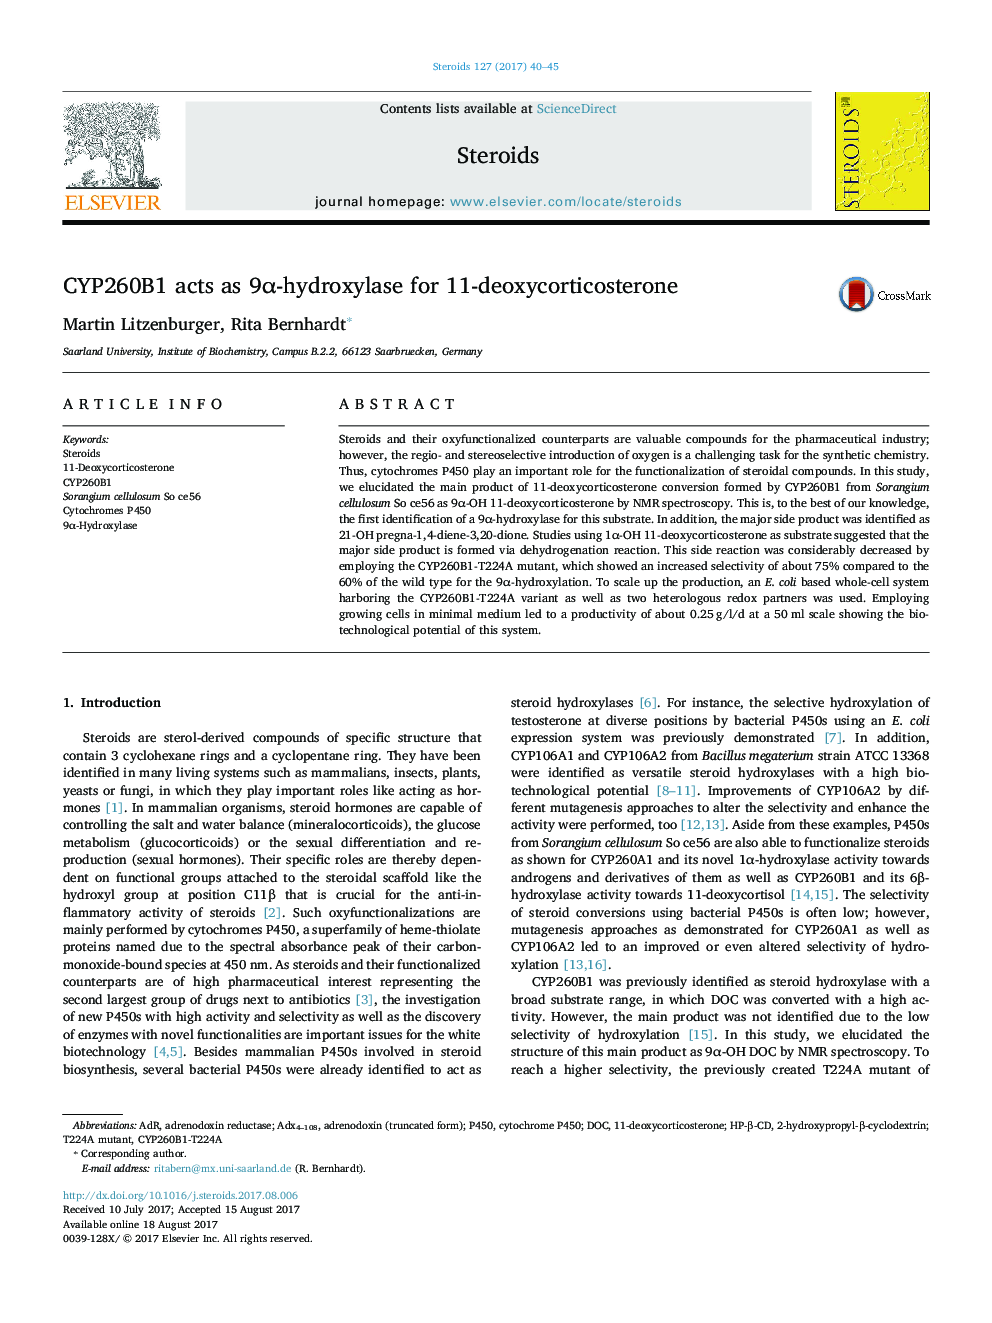 CYP260B1 acts as 9Î±-hydroxylase for 11-deoxycorticosterone